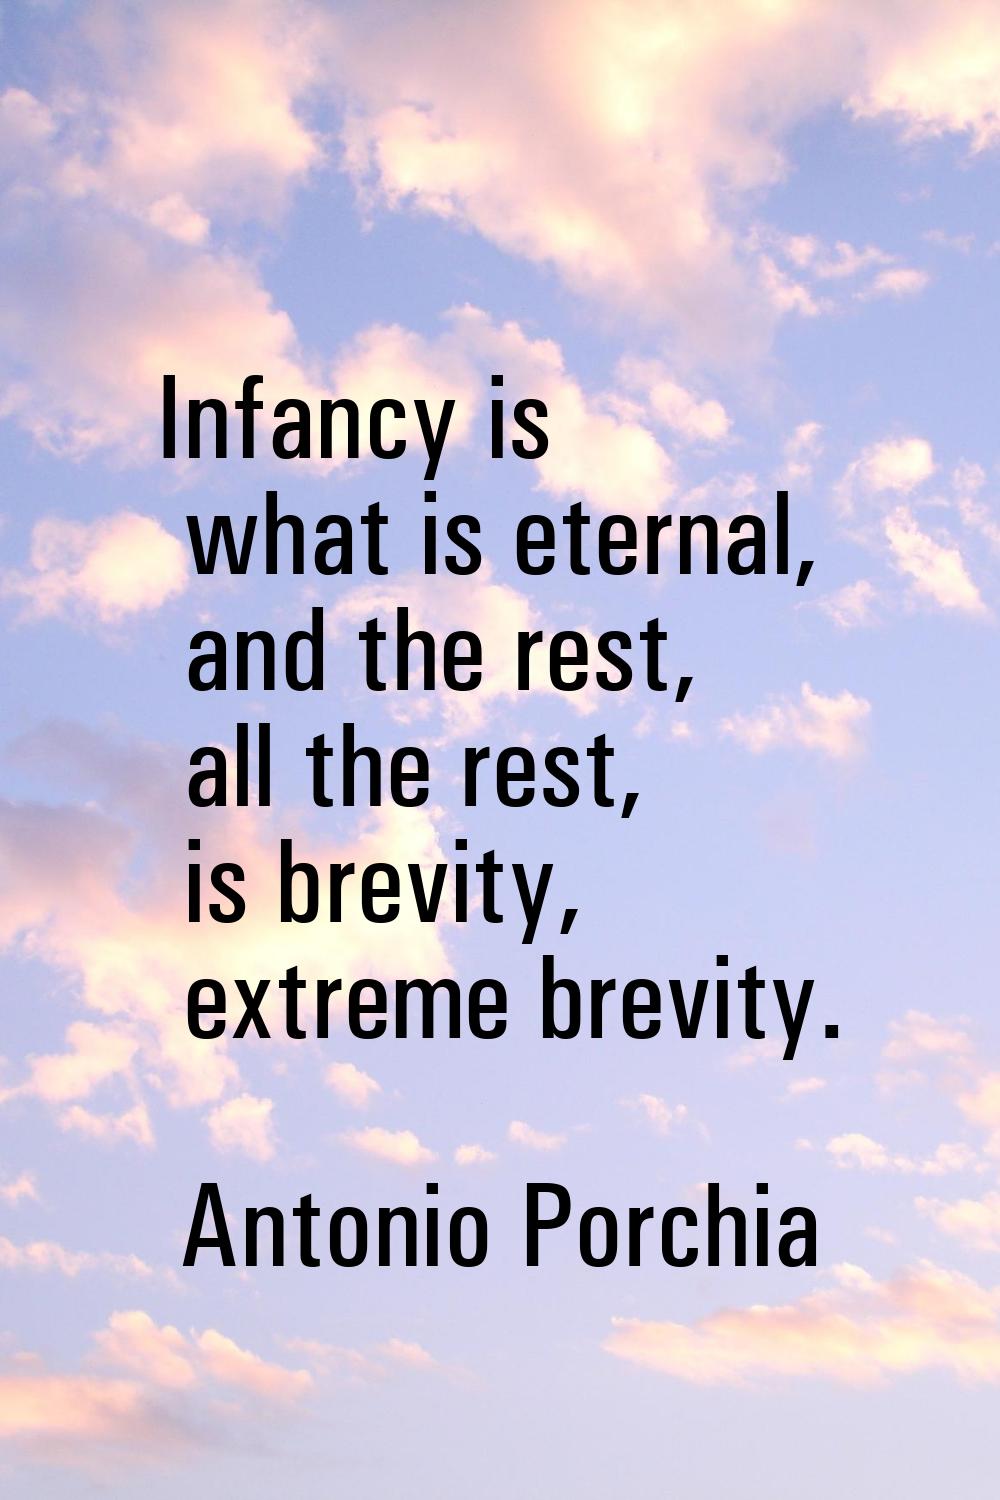 Infancy is what is eternal, and the rest, all the rest, is brevity, extreme brevity.